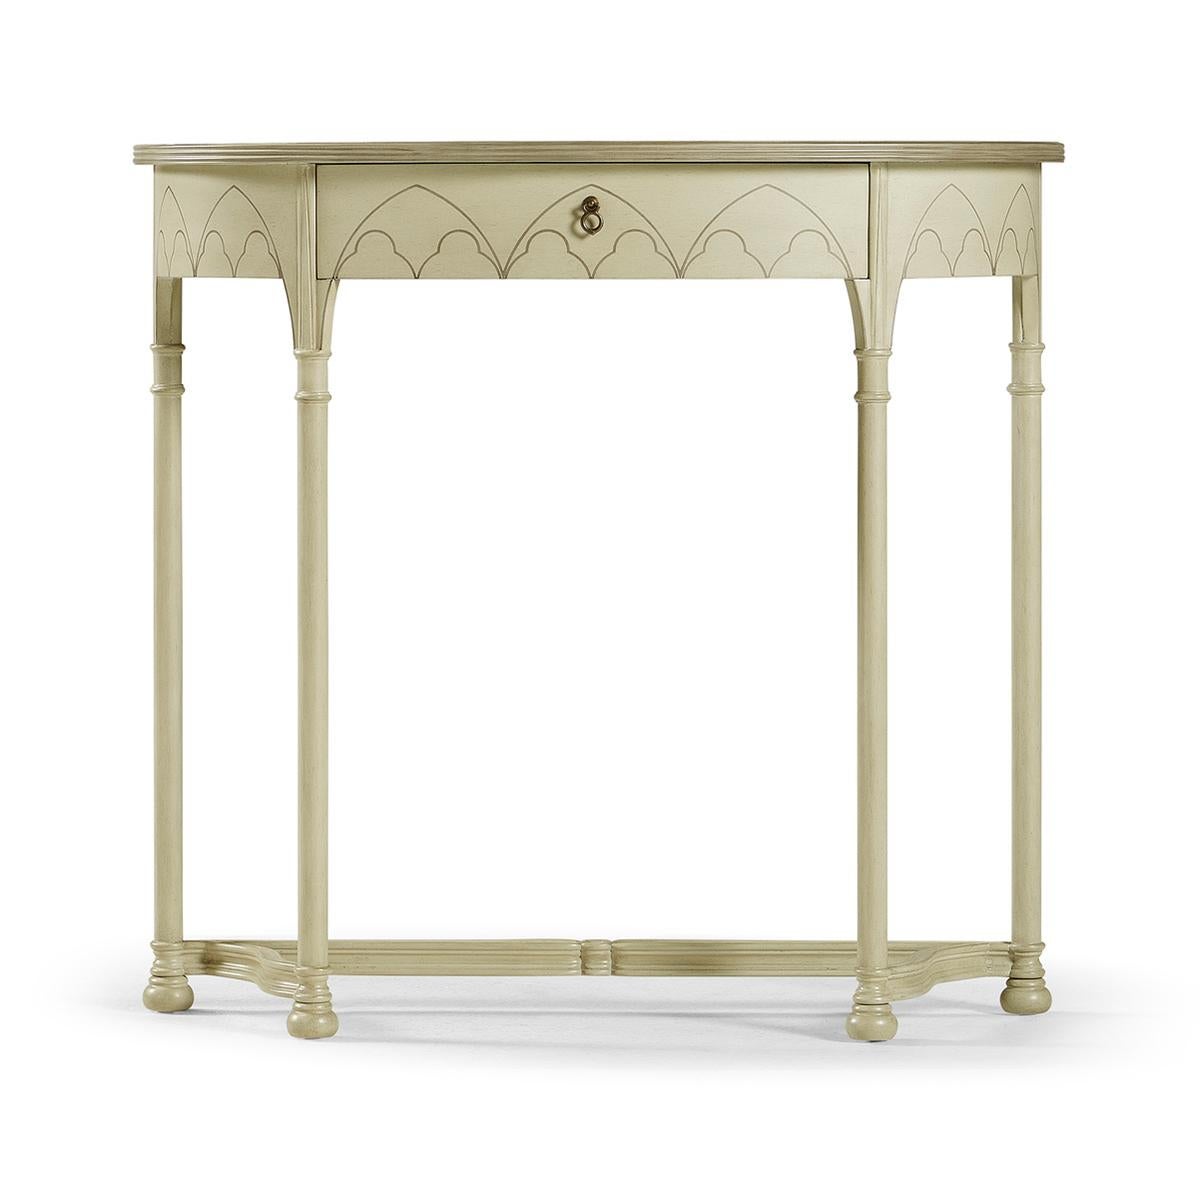 A Gothic painted console table with an antique clary sage finish, in an 18th-century gothic style, the demilune half-round form with fine contrasting inlays to the top and frieze, and legs with painted running floral motifs and